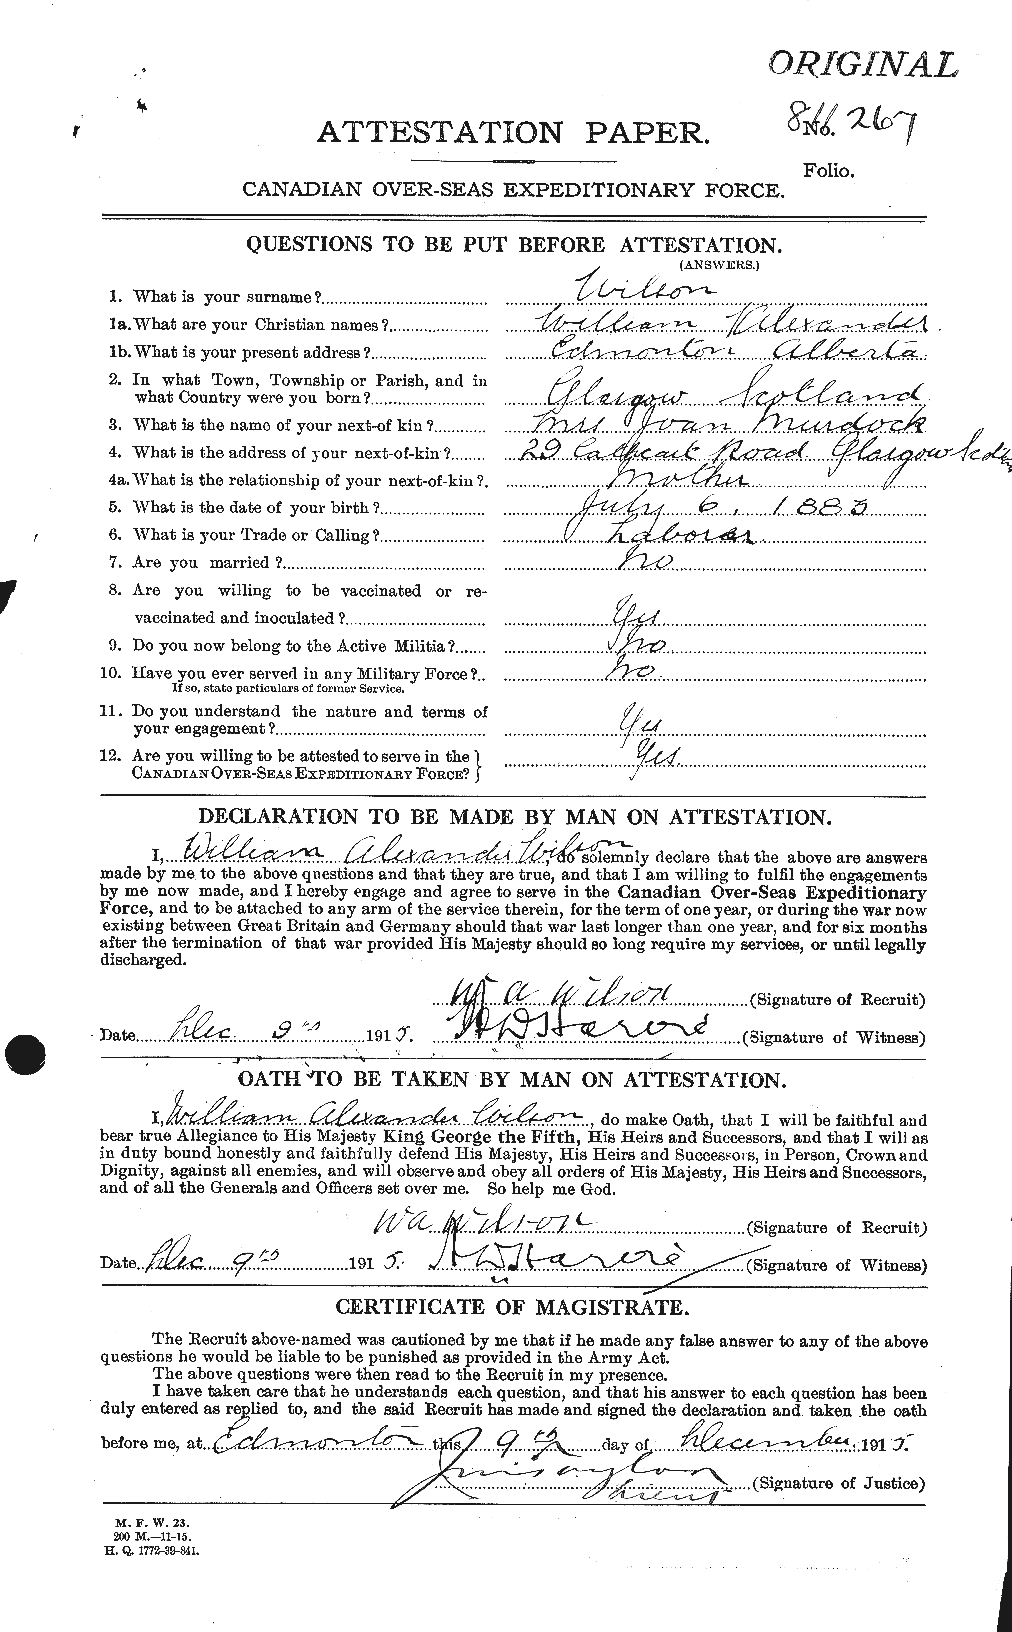 Personnel Records of the First World War - CEF 681923a